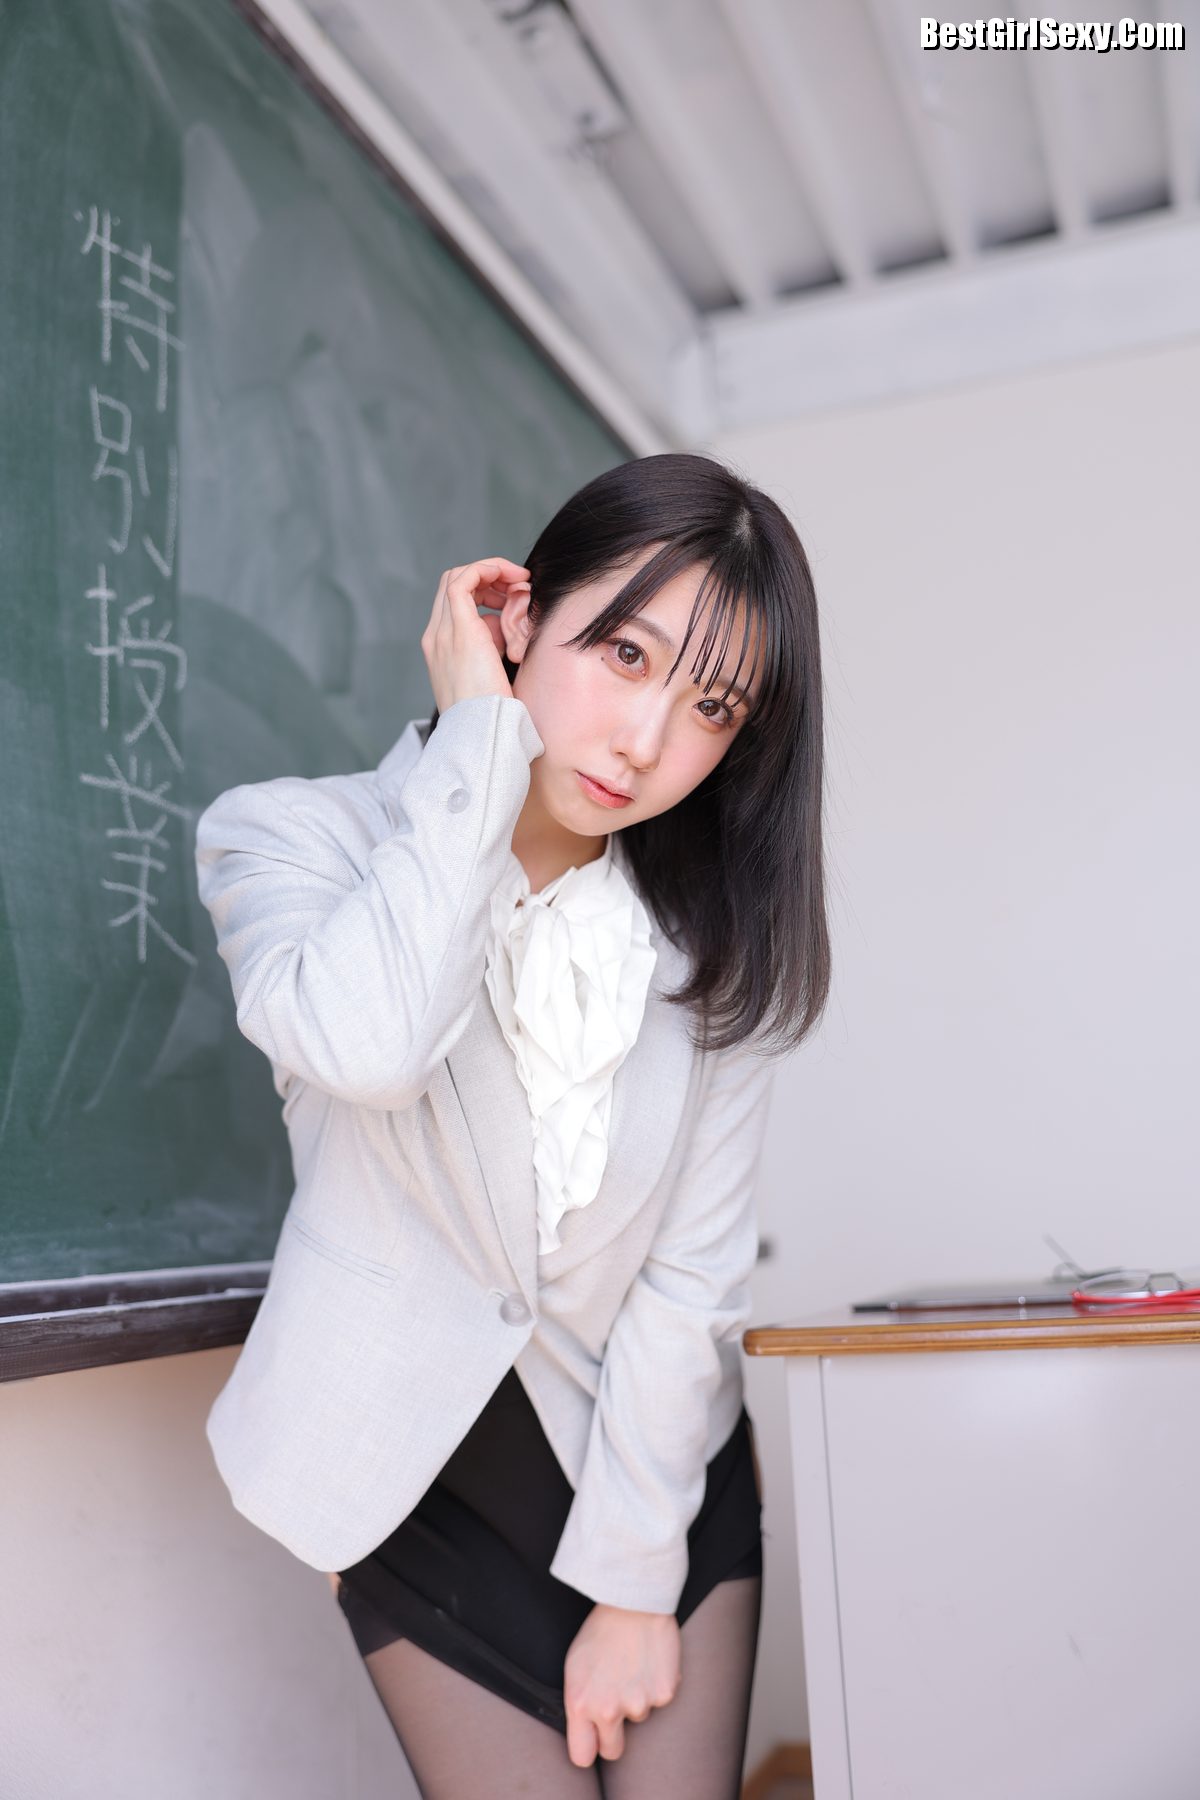 Momo-Ogawa-大河もも-Only-I-Know-What-Would-Happen-If-Momo-chan-Became-A-Teacher-A-0012-6879200887.jpg